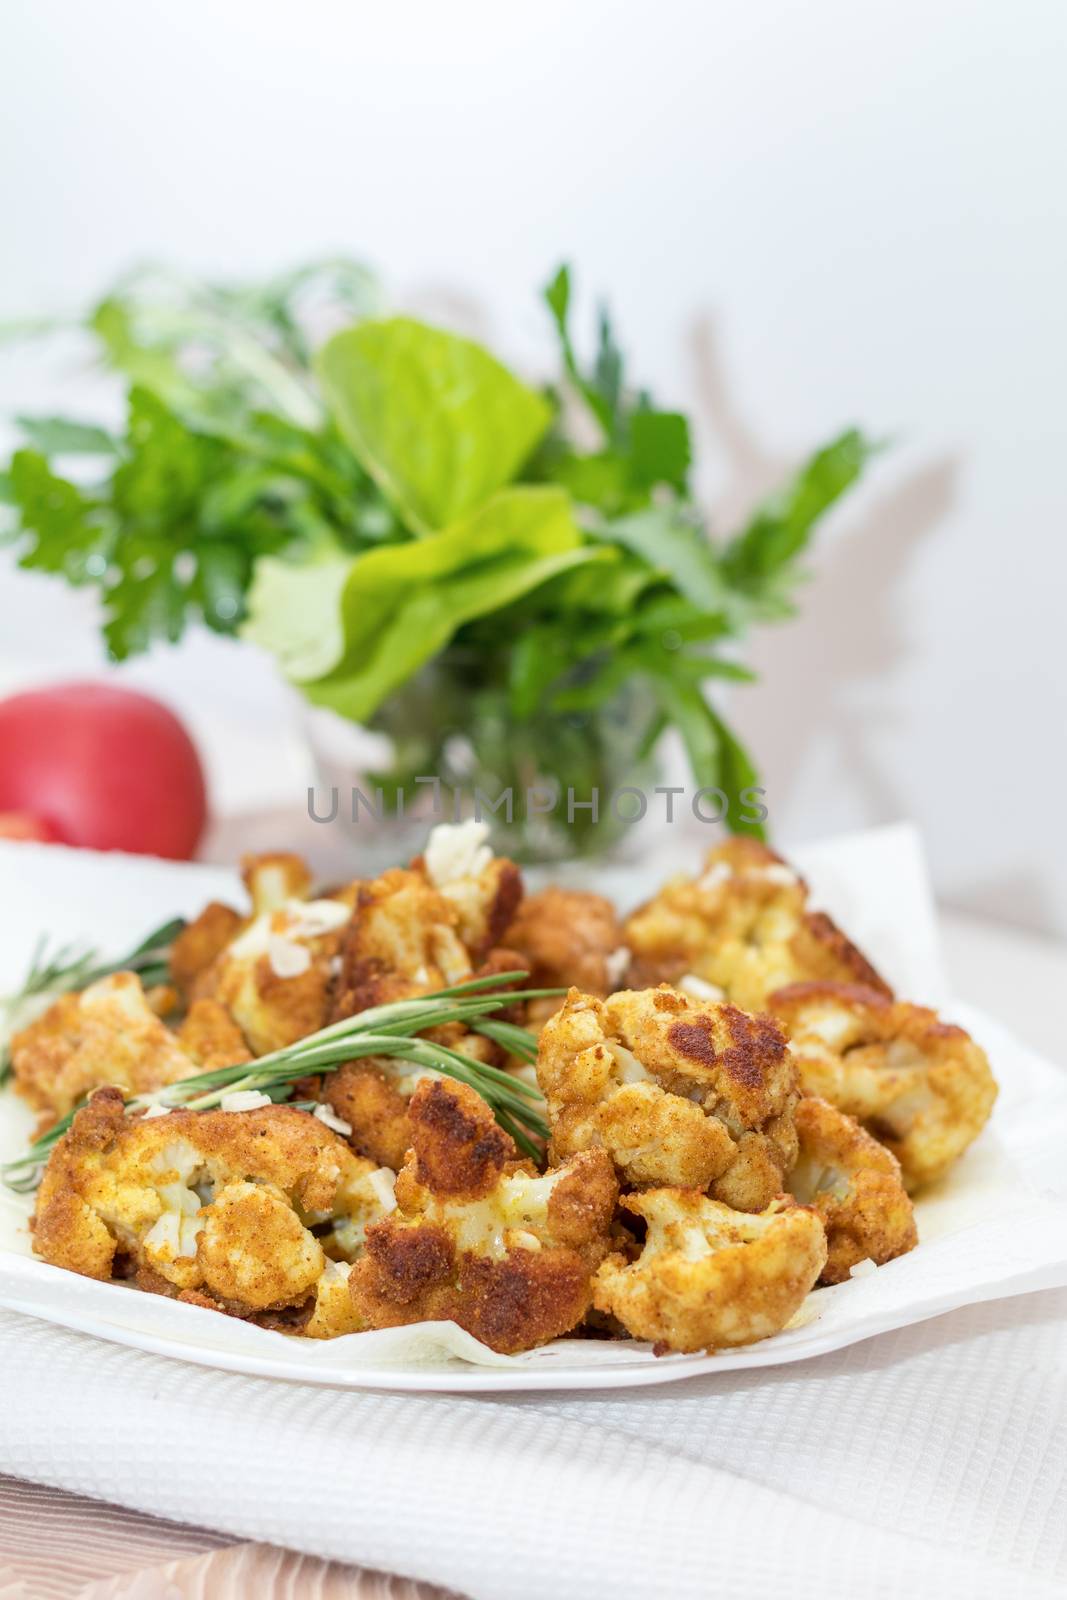 Fried cauliflower in batter on a white plate with white napkin.  by ArtSvitlyna